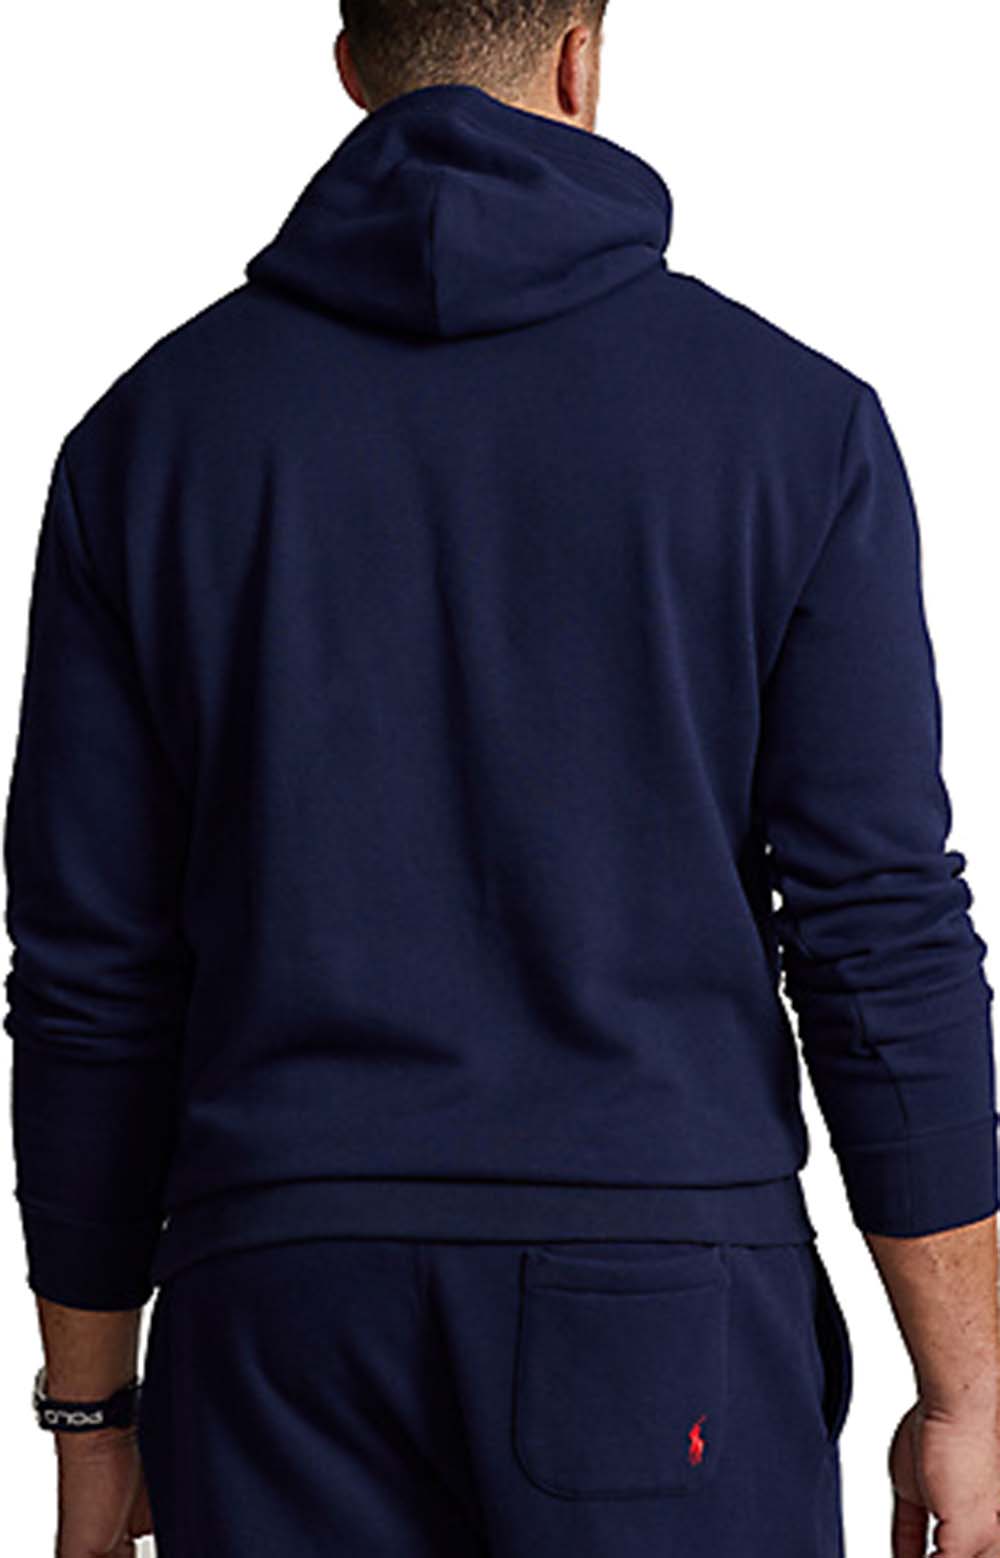 The Big Fit RL Fleece Logo Pullover Hoodie - Cruise Navy